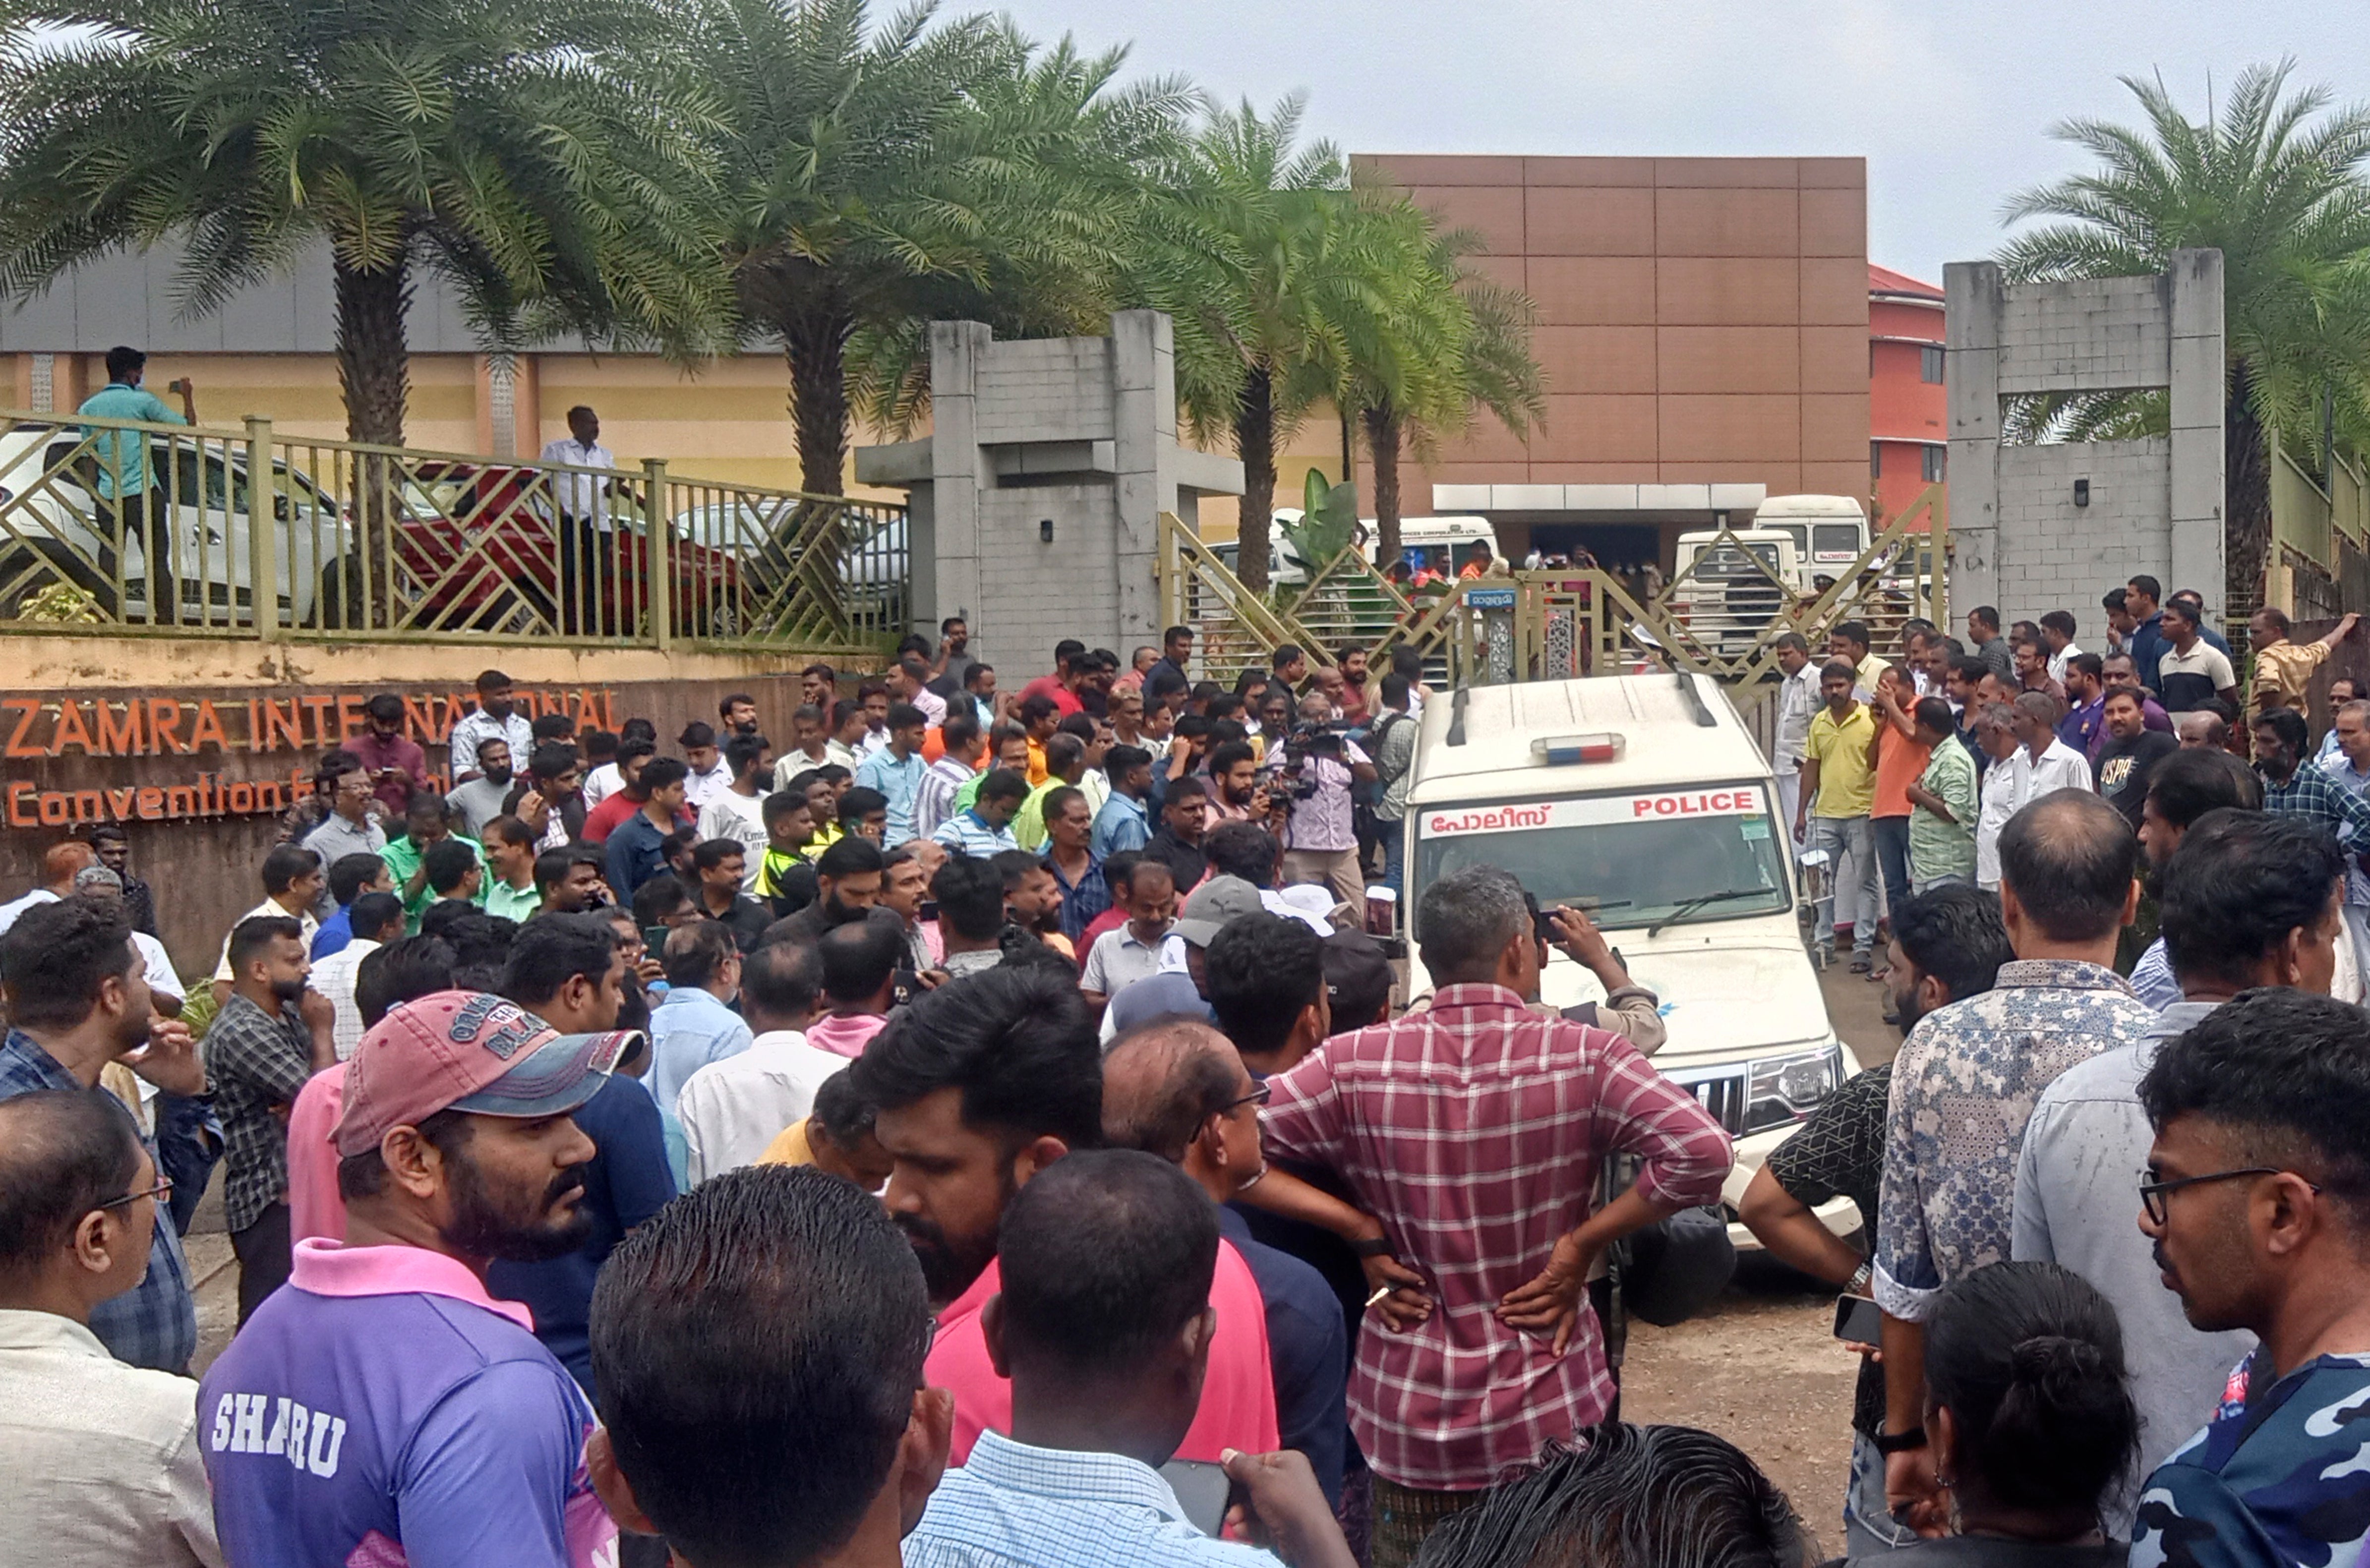 People gather outside following a blast at the Zamra convention center in Kalamassery, a town in Kochi, southern Kerala state, India, Sunday, 29 Oc, 2023